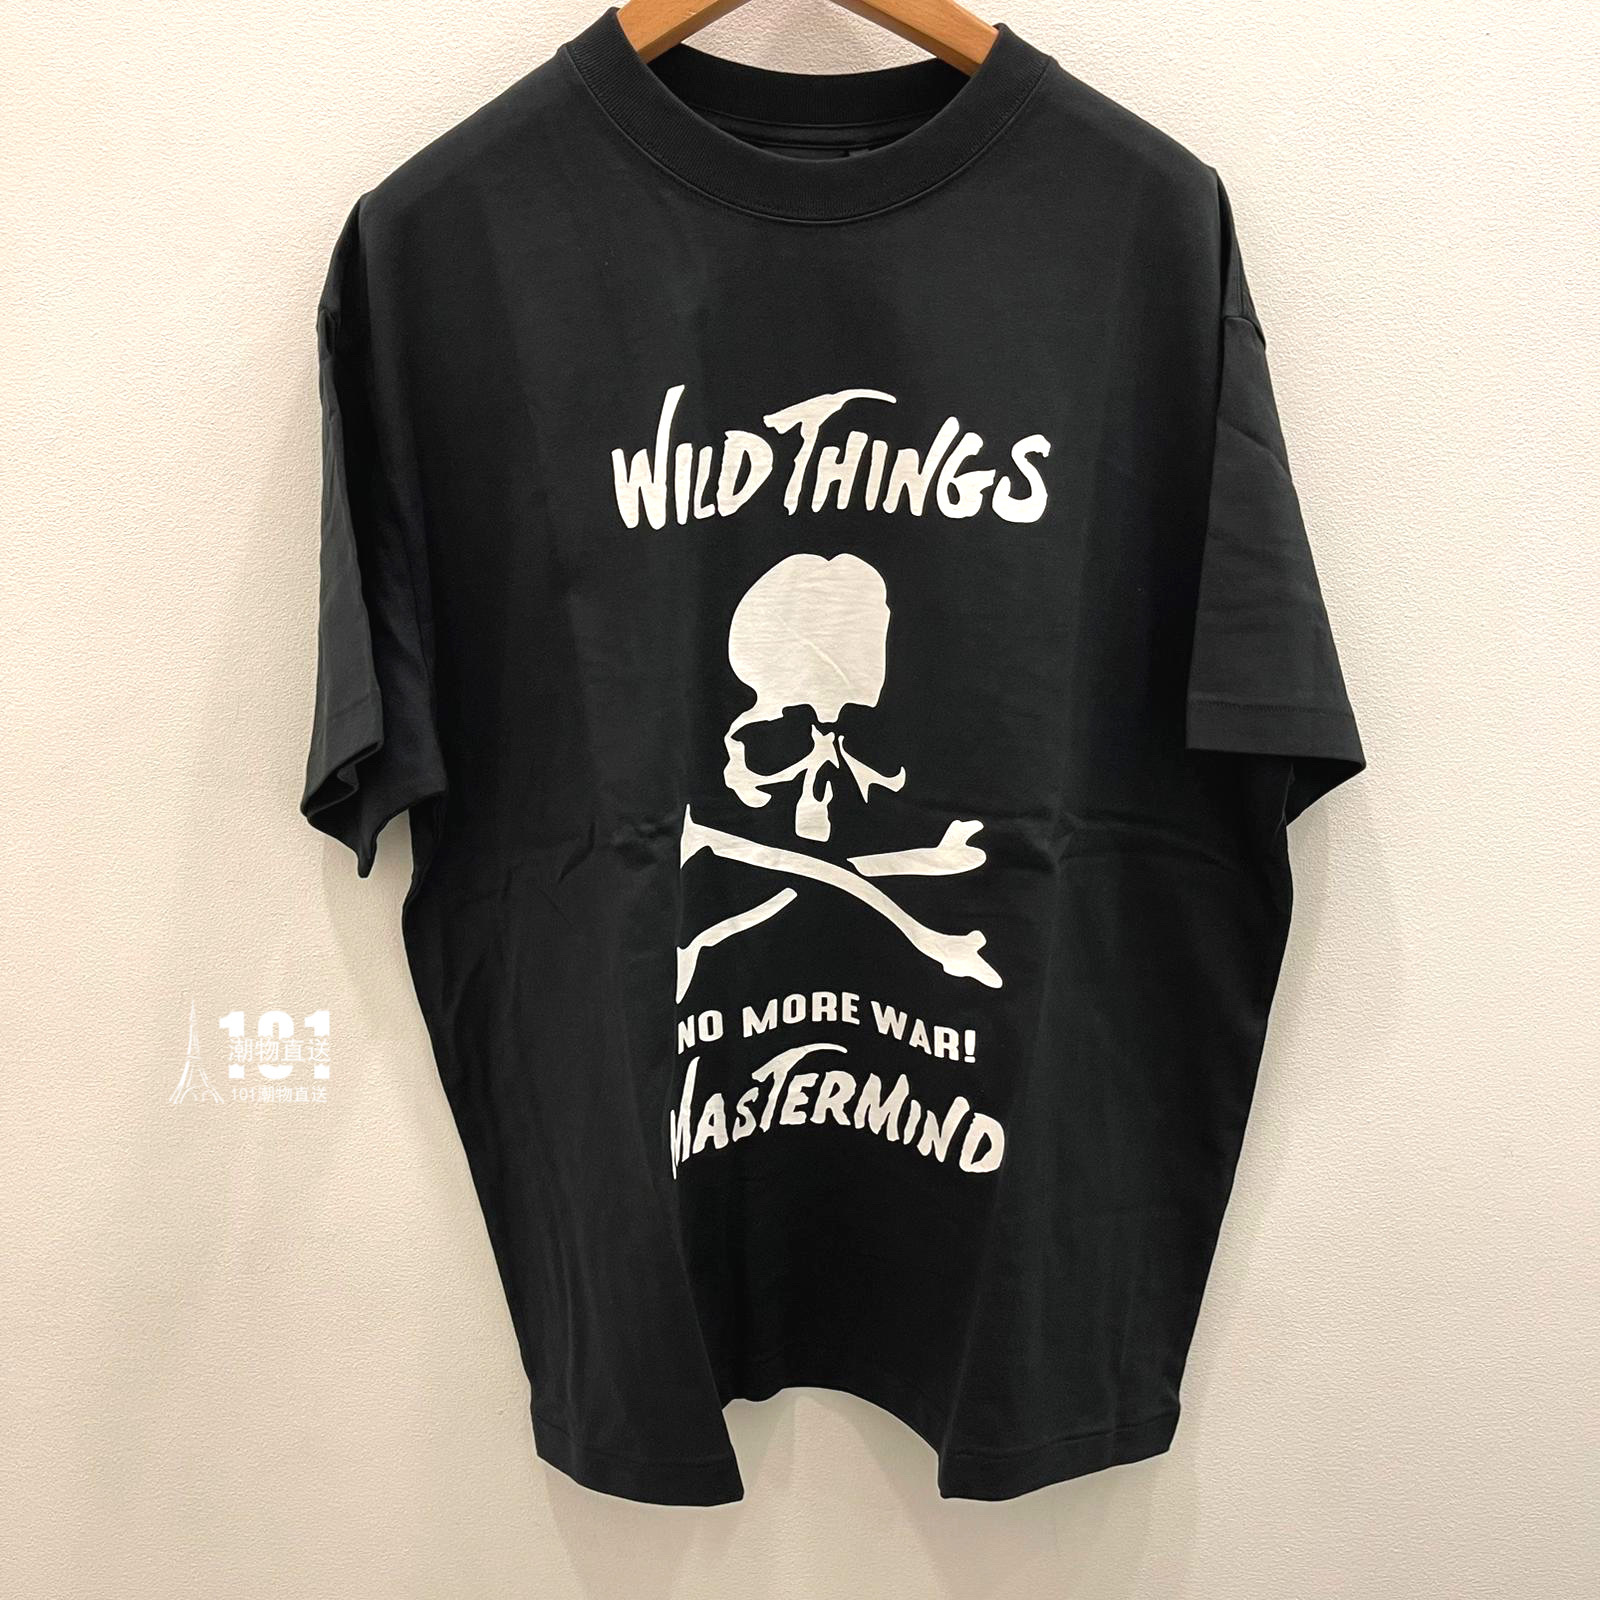 mastermind japan wildthings tシャツ Lサイズ - Tシャツ/カットソー